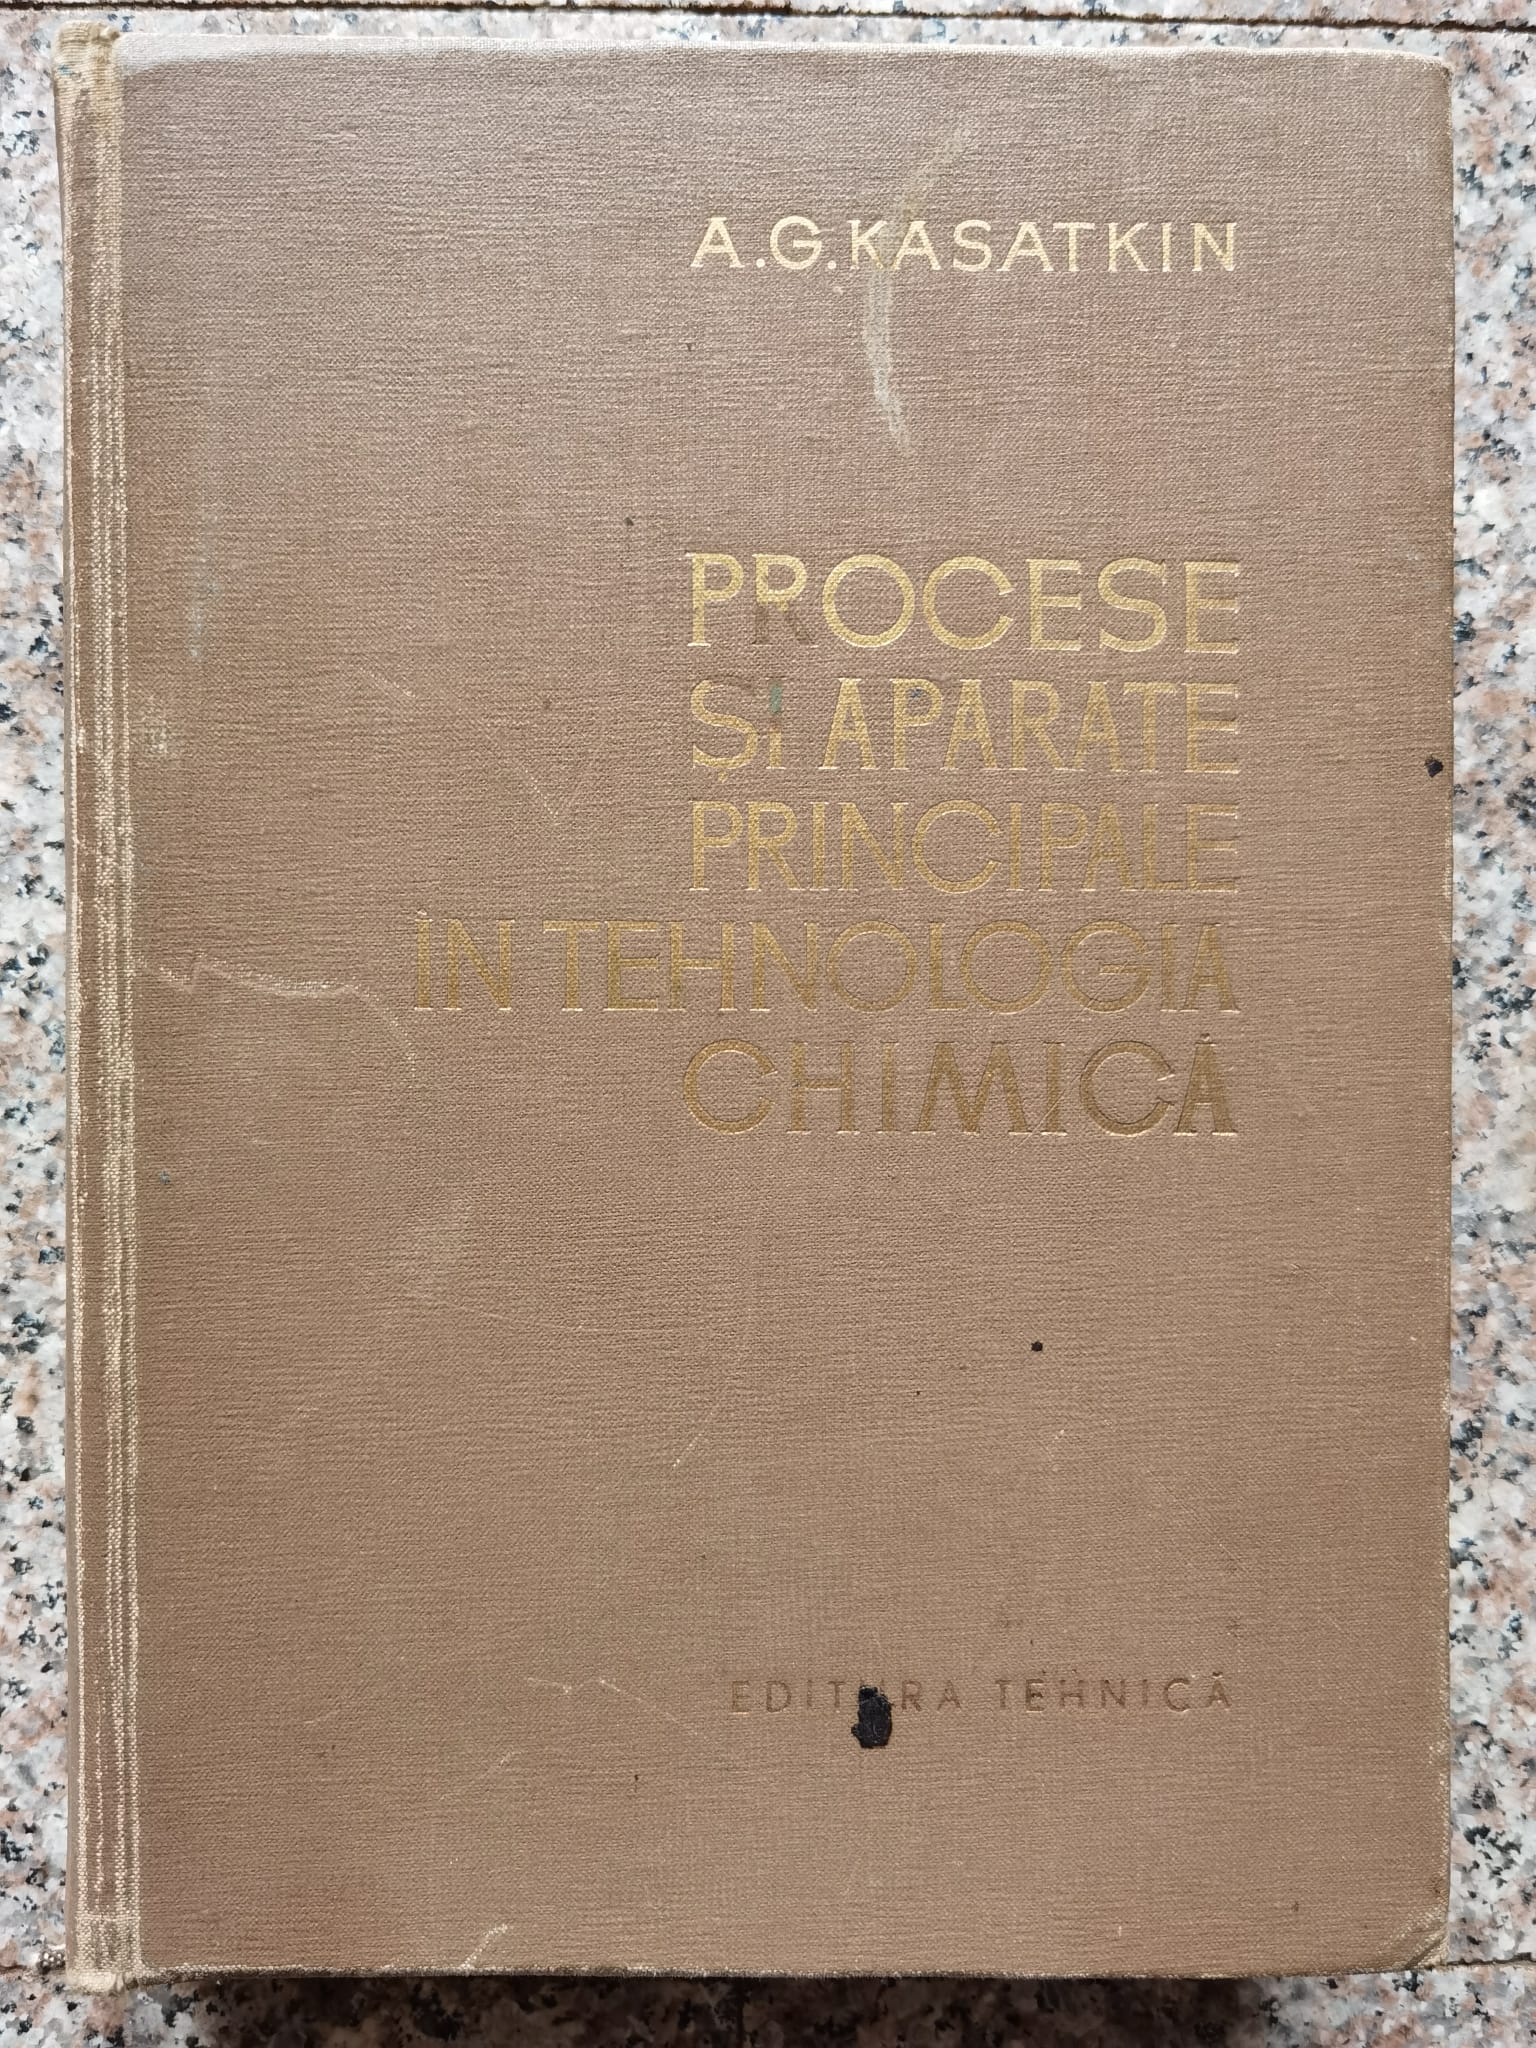 procese si aparate principale in tehnologia chimica                                                  a.g. kasatkin                                                                                       